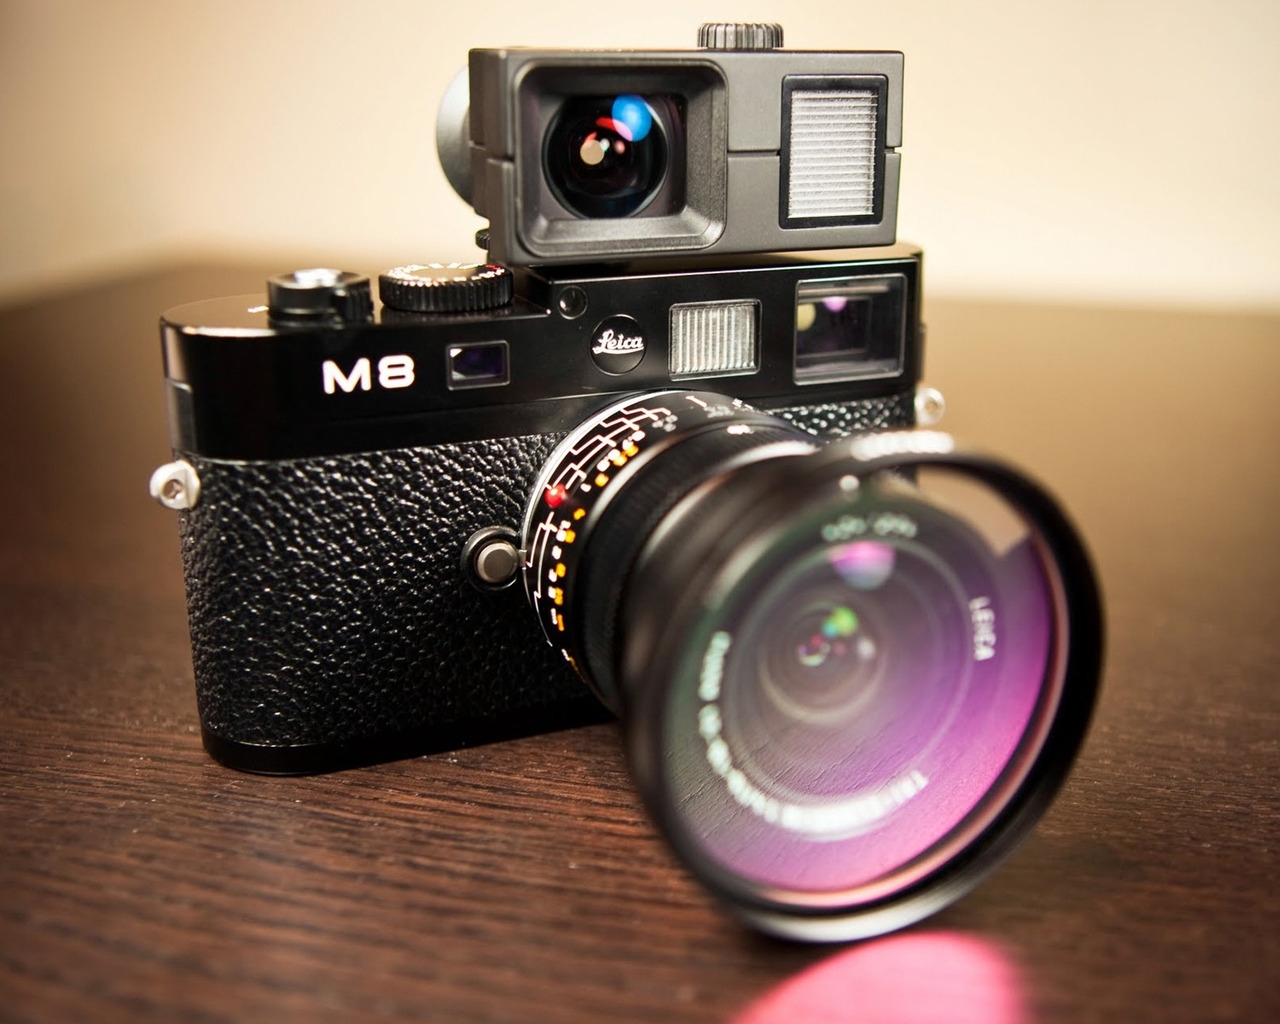 Leica M8 for 1280 x 1024 resolution